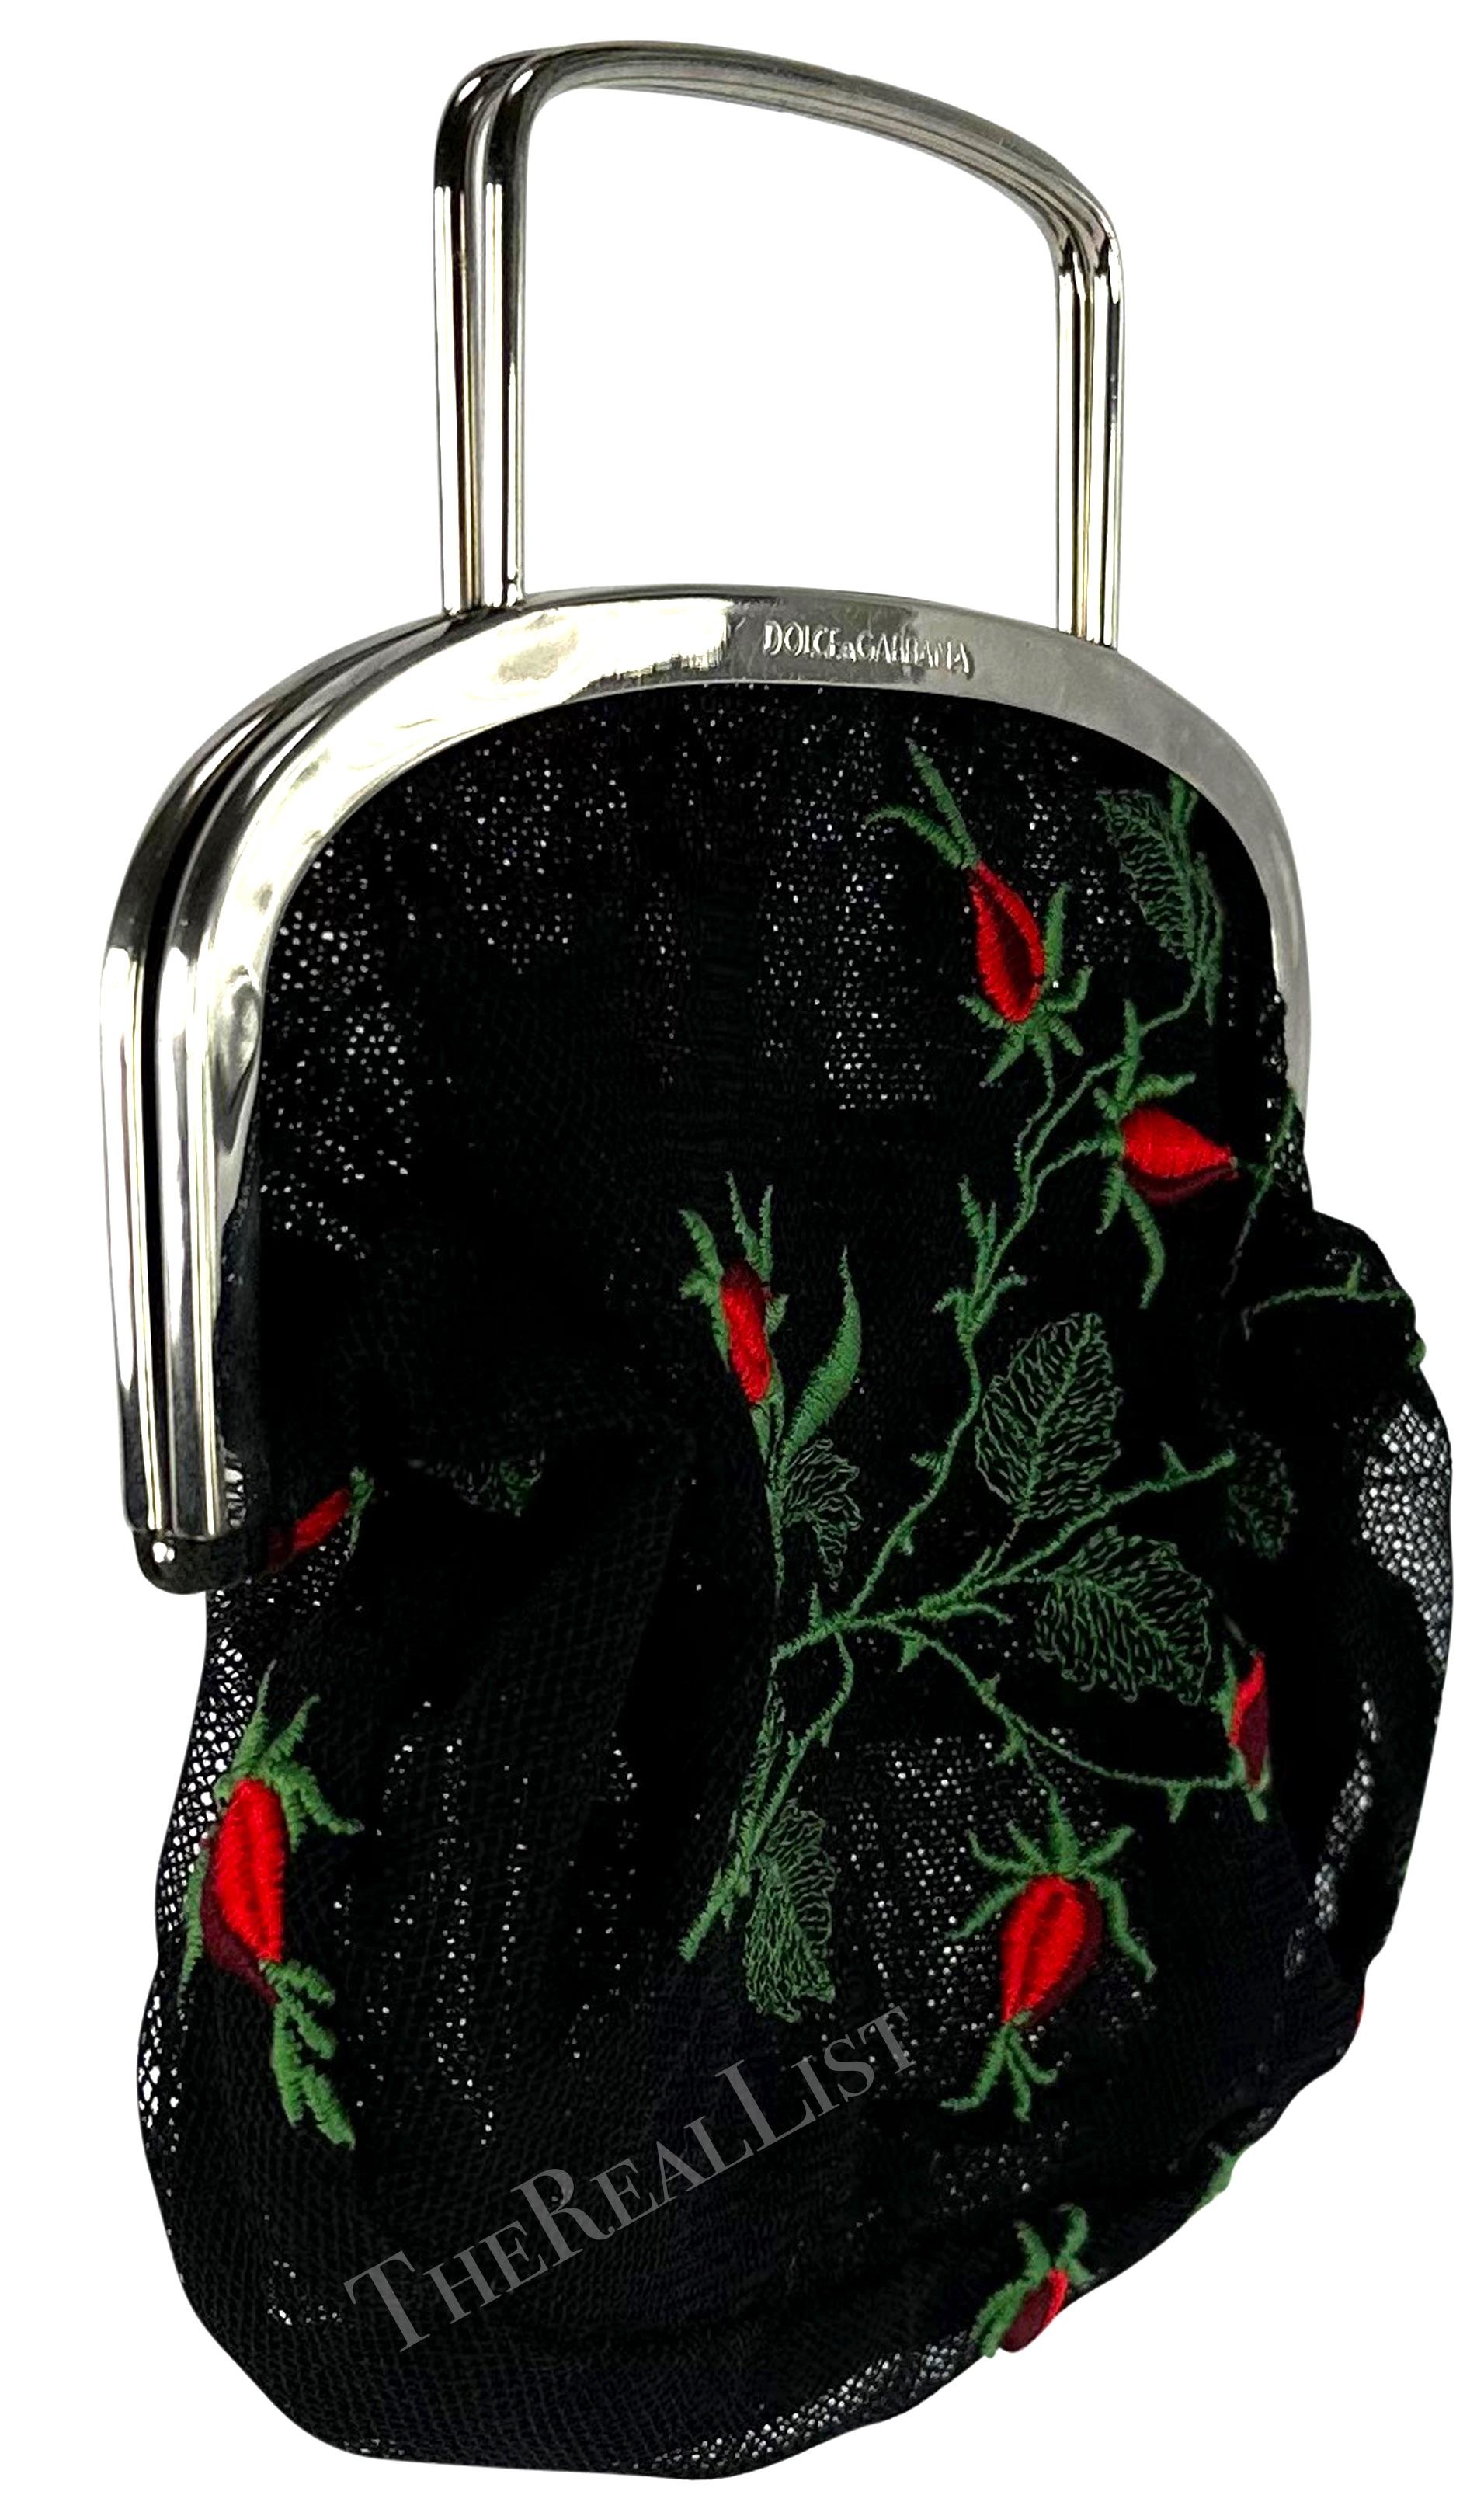 1990s Dolce & Gabbana Black Mesh Red Embroidered Floral Mini Evening Bag For Sale 6